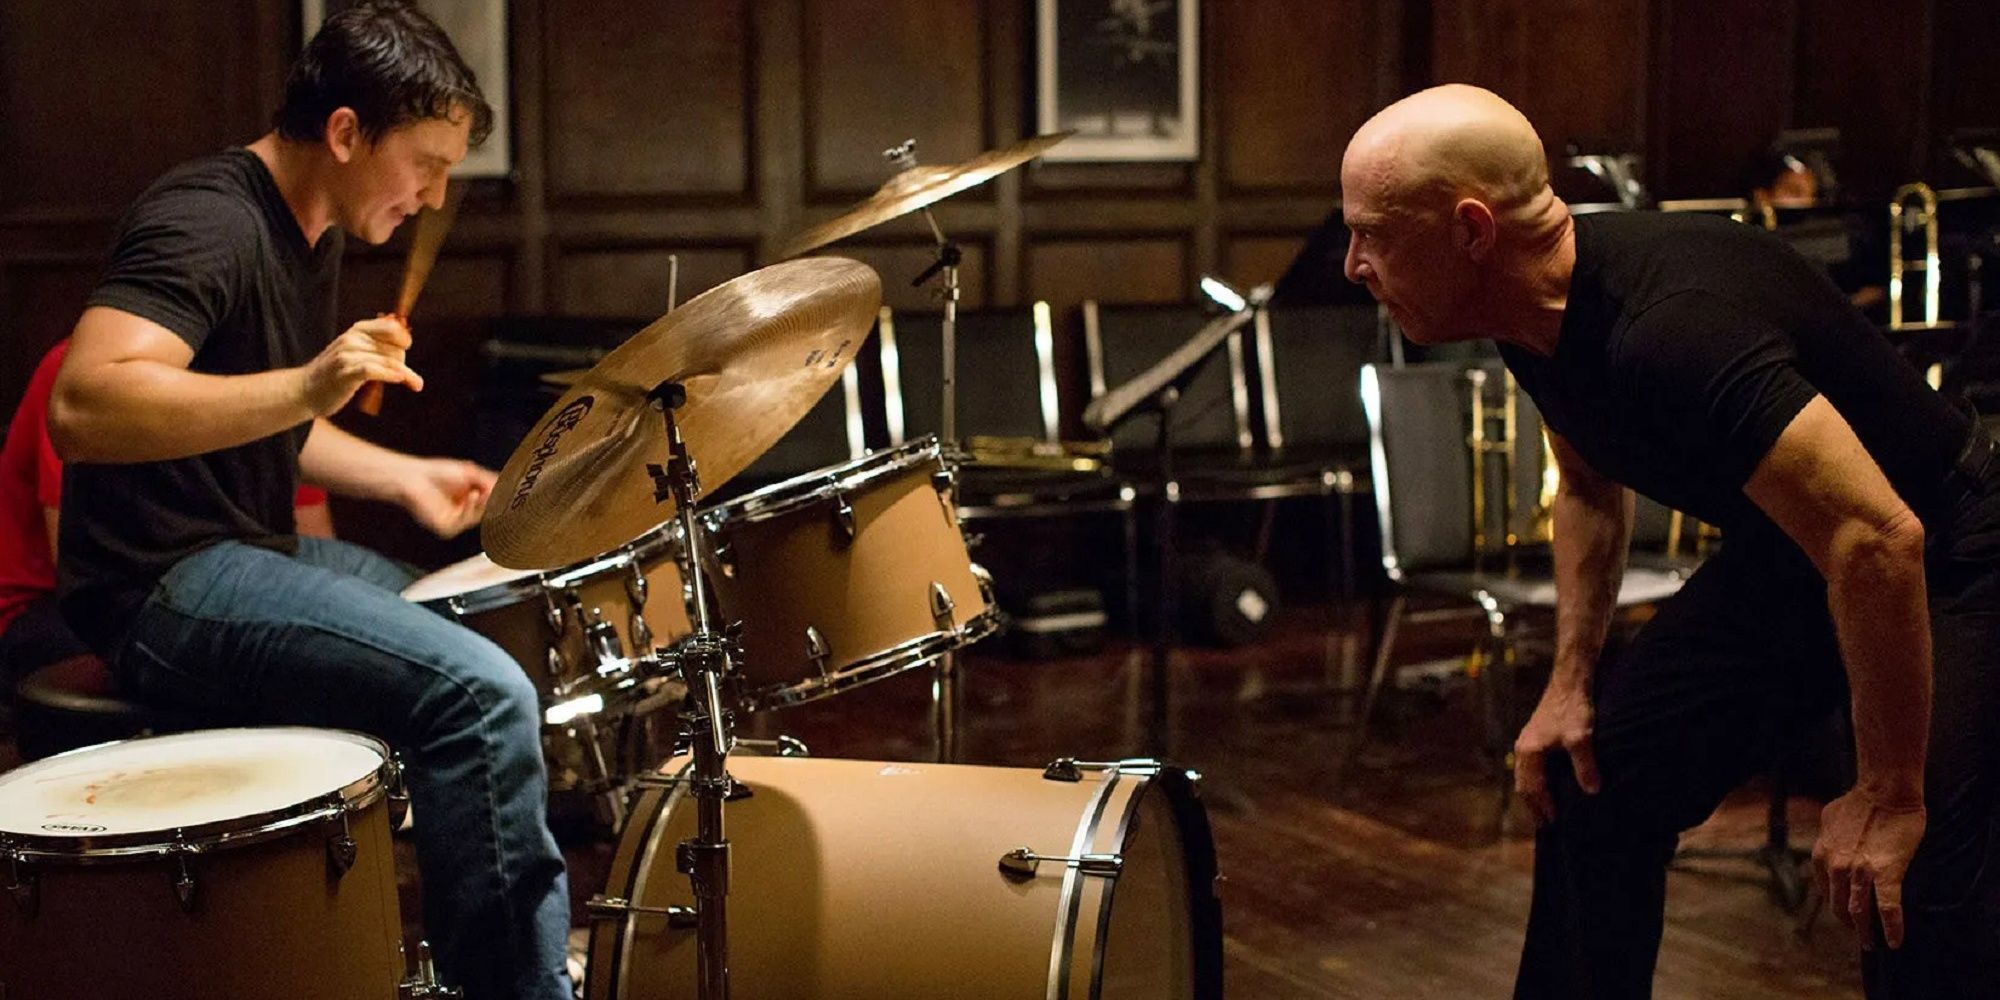 Andrew tries to impress Fletcher with his drumming skills in Whiplash.